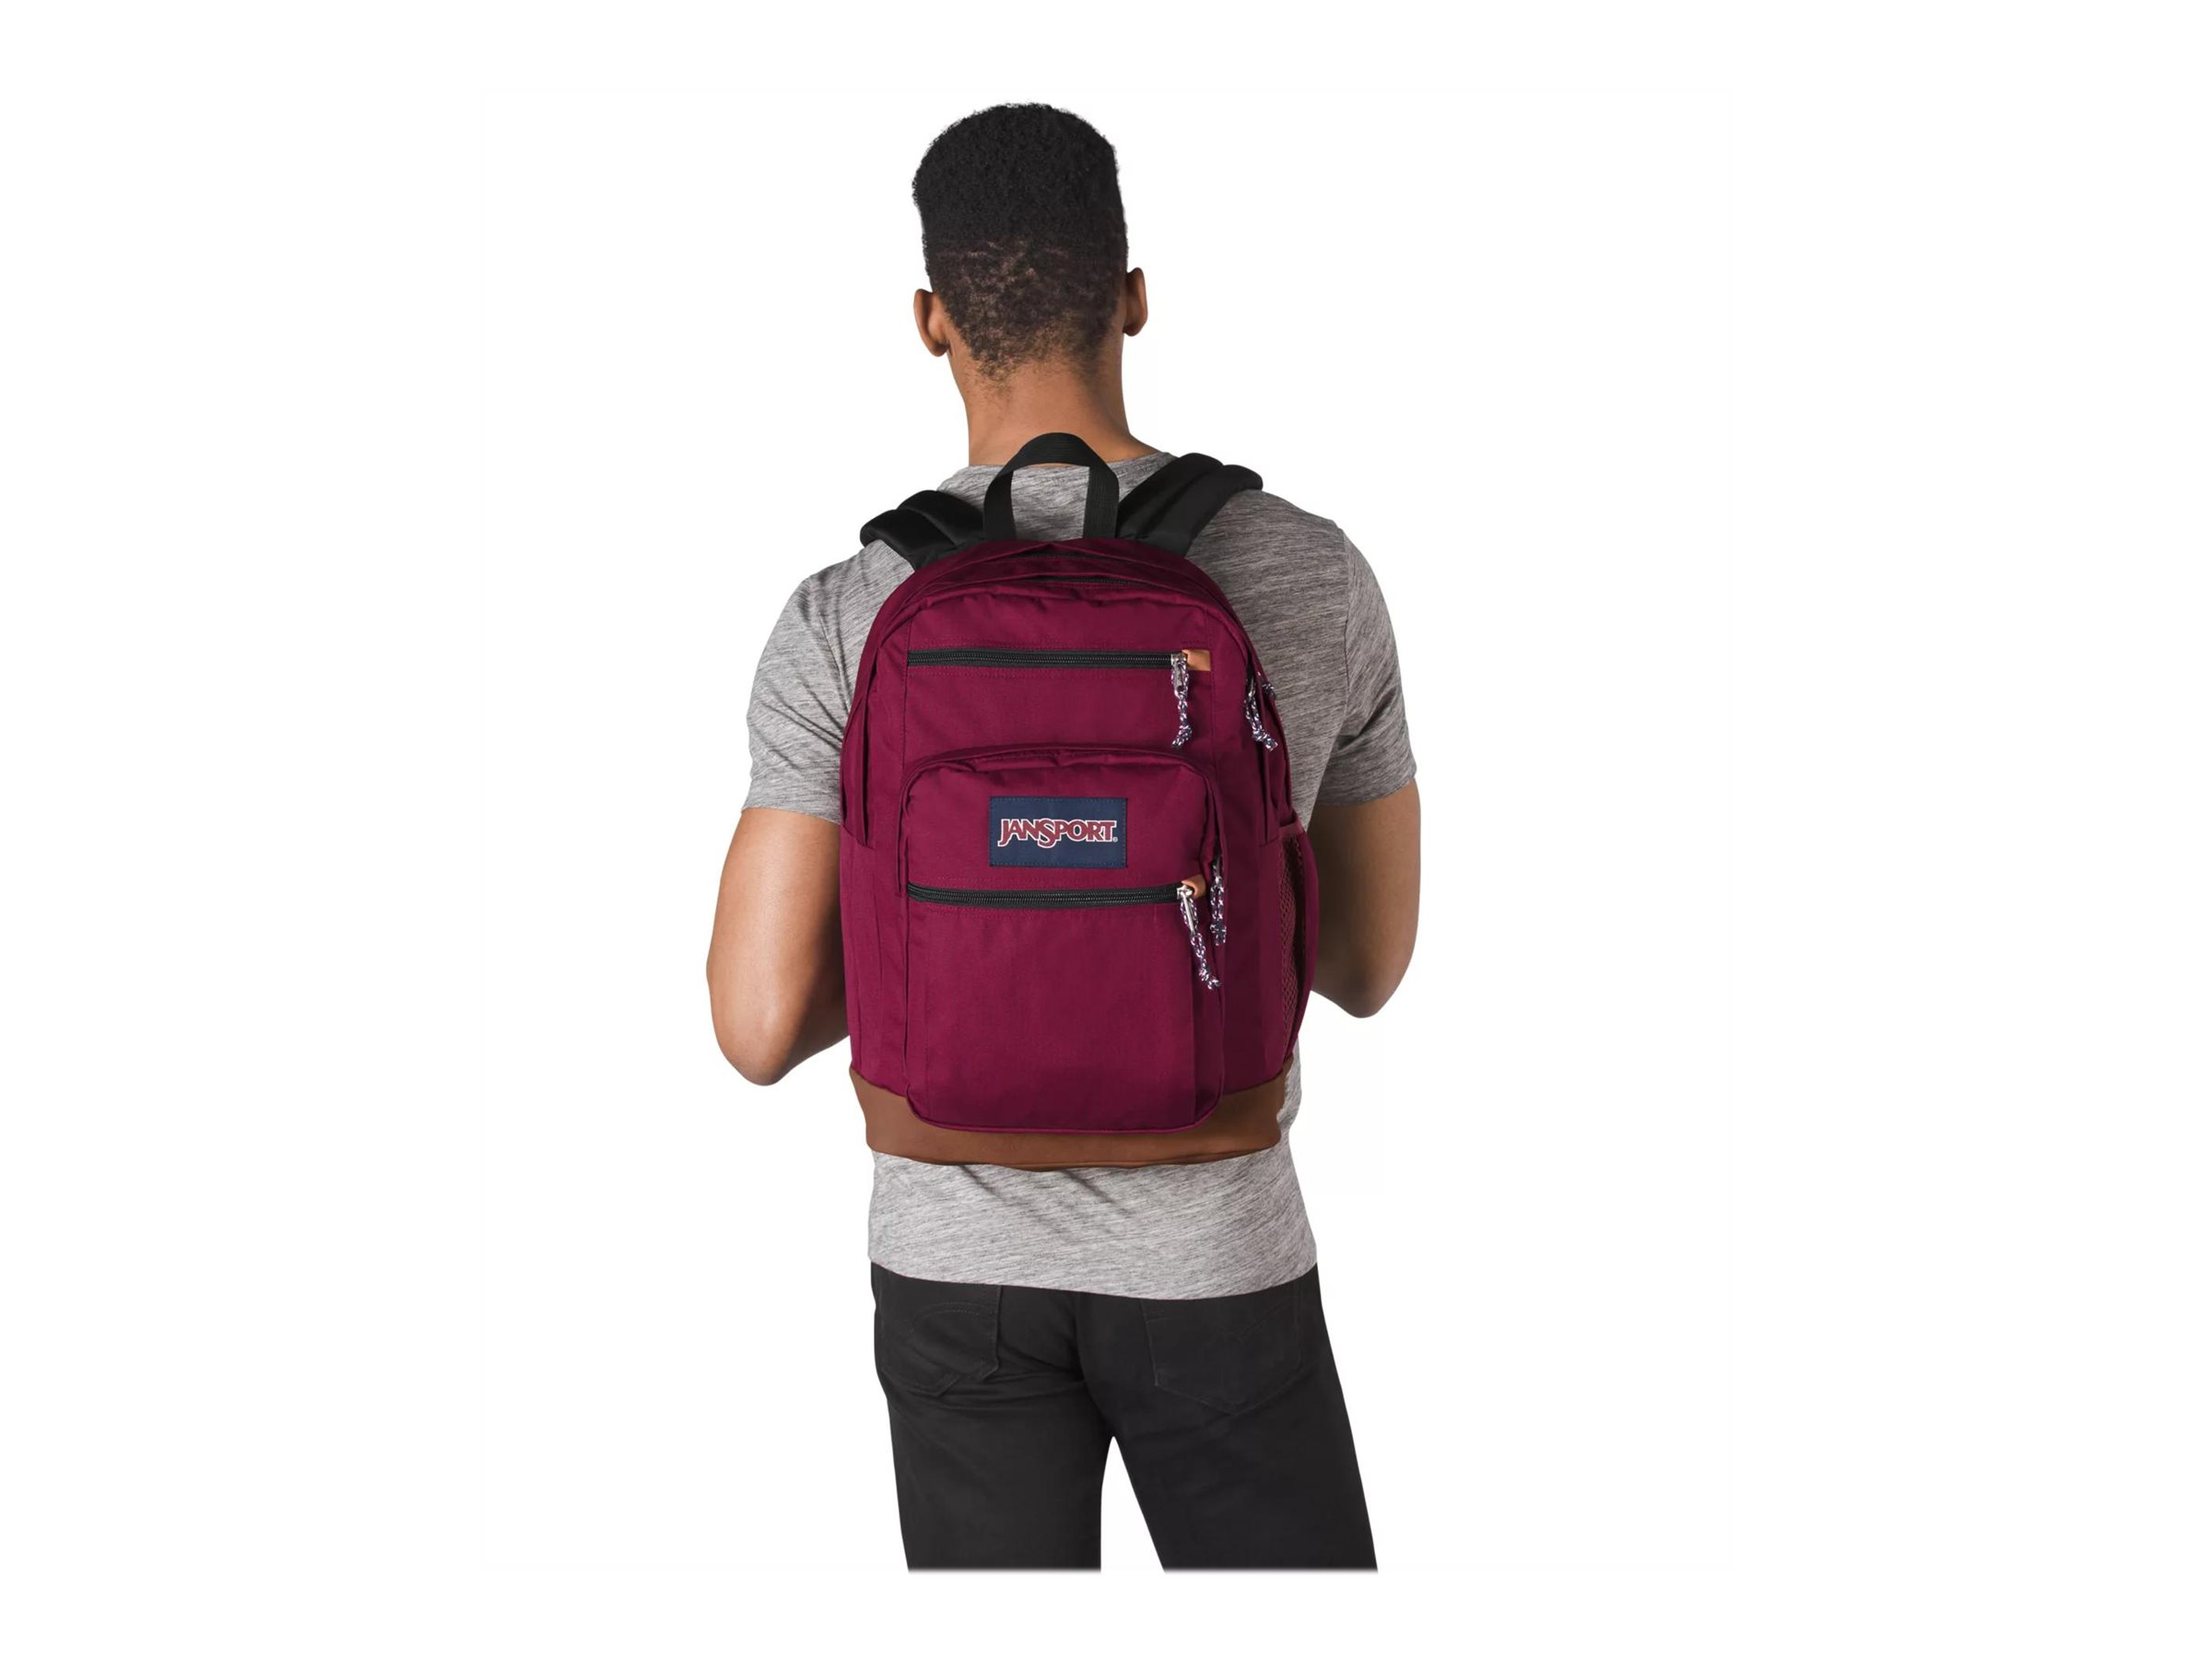 JanSport Cool Student - Notebook carrying backpack - 15" - russet red - image 3 of 4